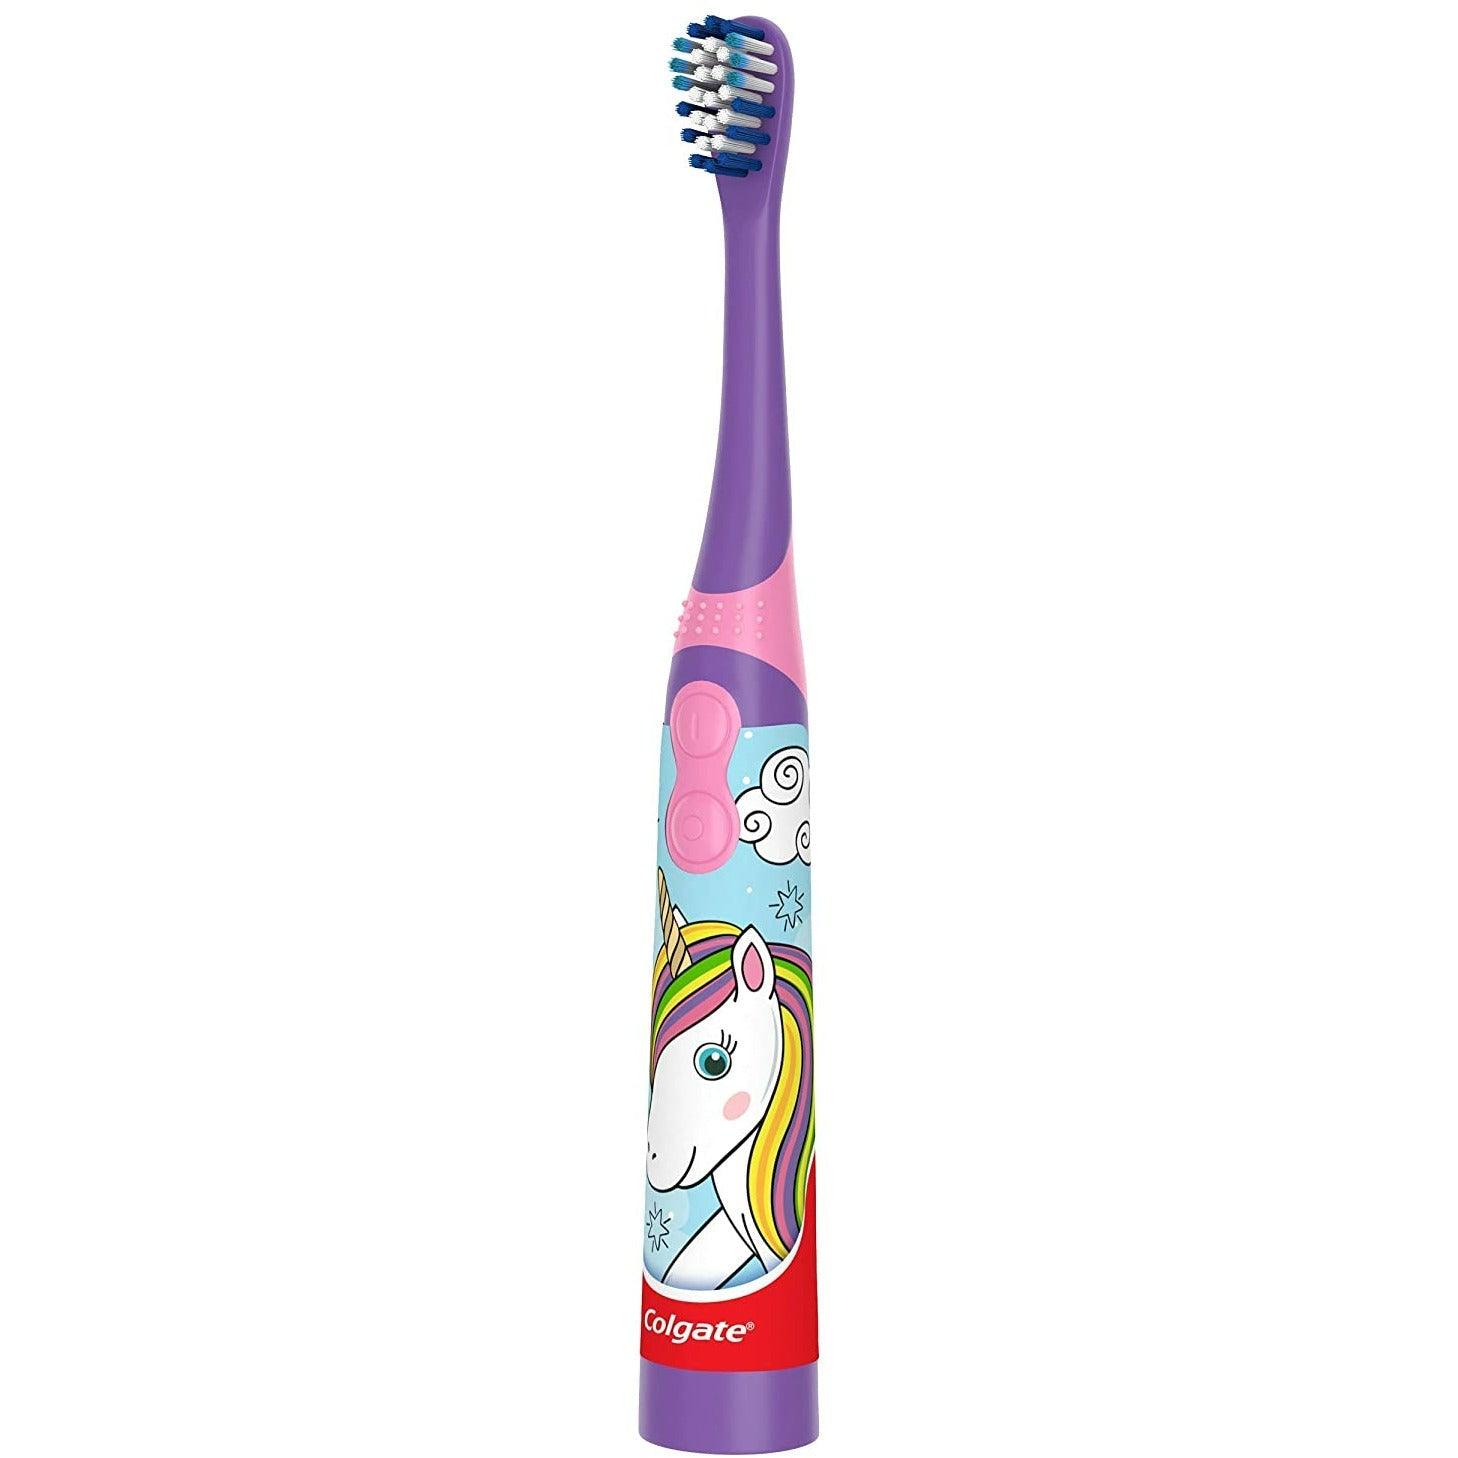 Colgate Kids Electric Battery Powered Toothbrush Extra Soft - Unicorn - BumbleToys - 5-7 Years, Baby Saftey & Health, Girls, Pre-Order, Toothbrush, unicorn